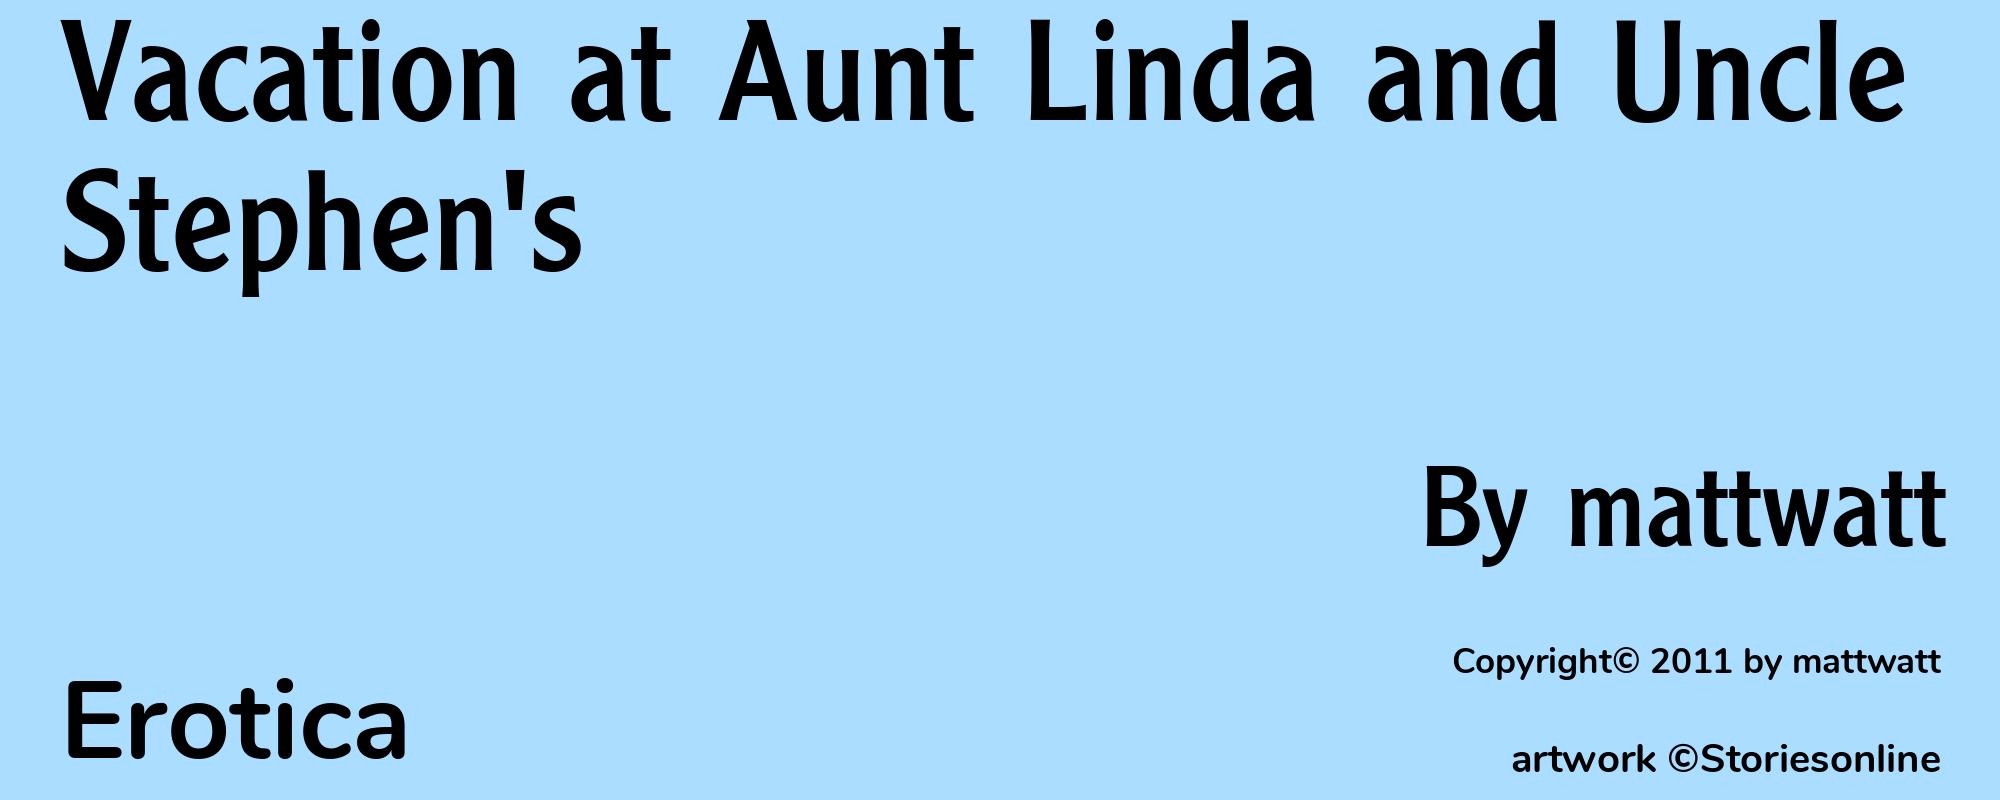 Vacation at Aunt Linda and Uncle Stephen's - Cover